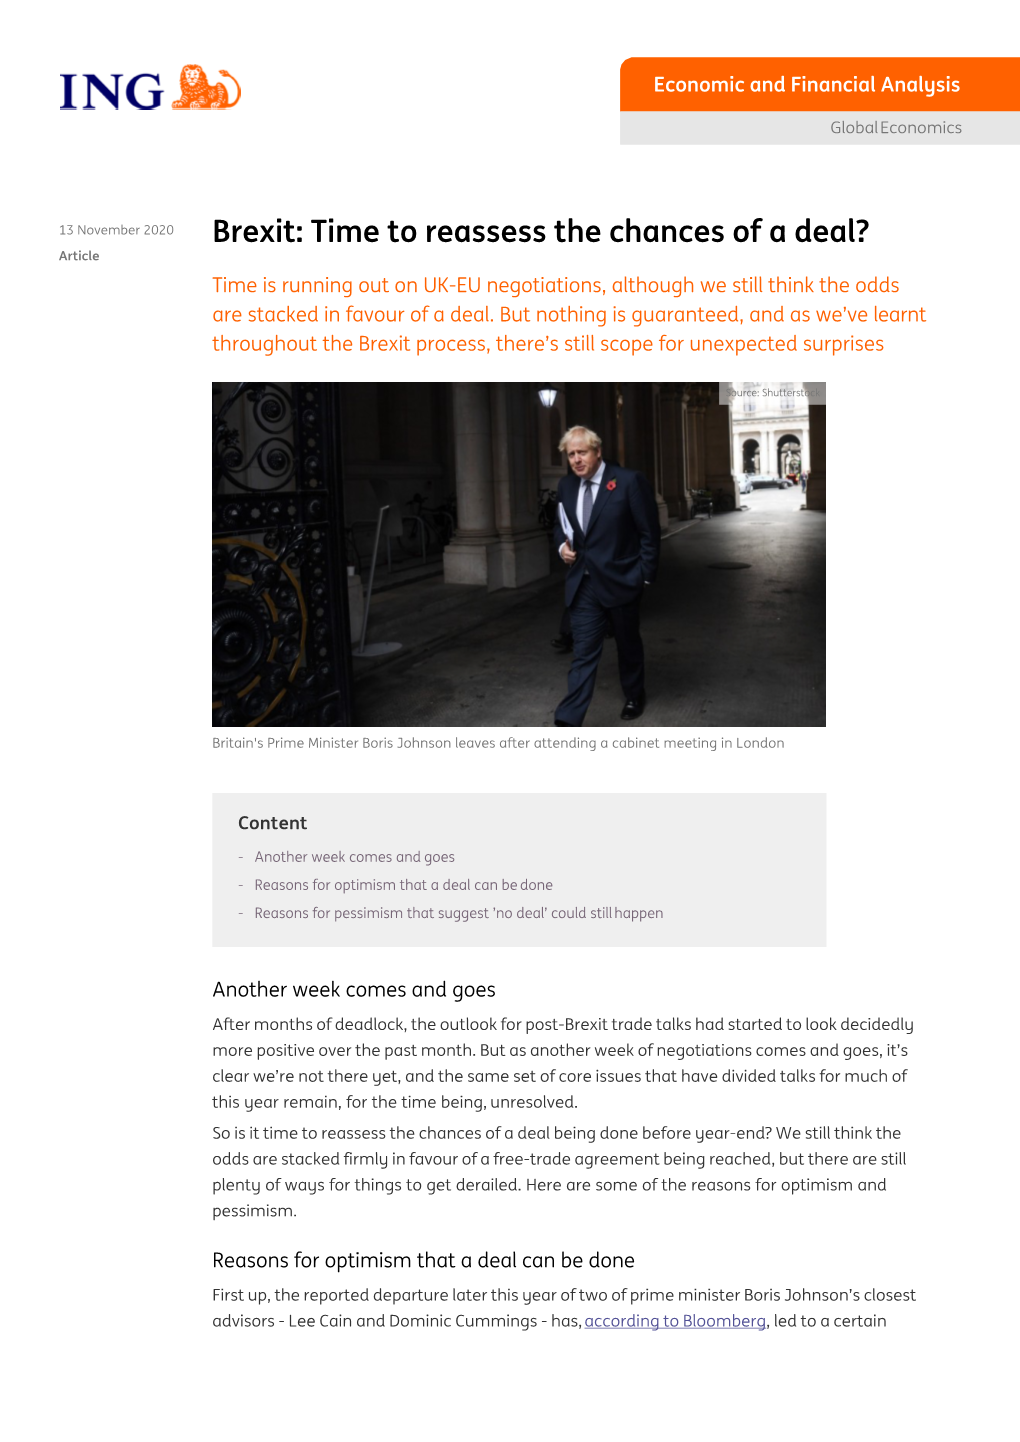 Brexit: Time to Reassess the Chances of a Deal? Article Time Is Running out on UK-EU Negotiations, Although We Still Think the Odds Are Stacked in Favour of a Deal